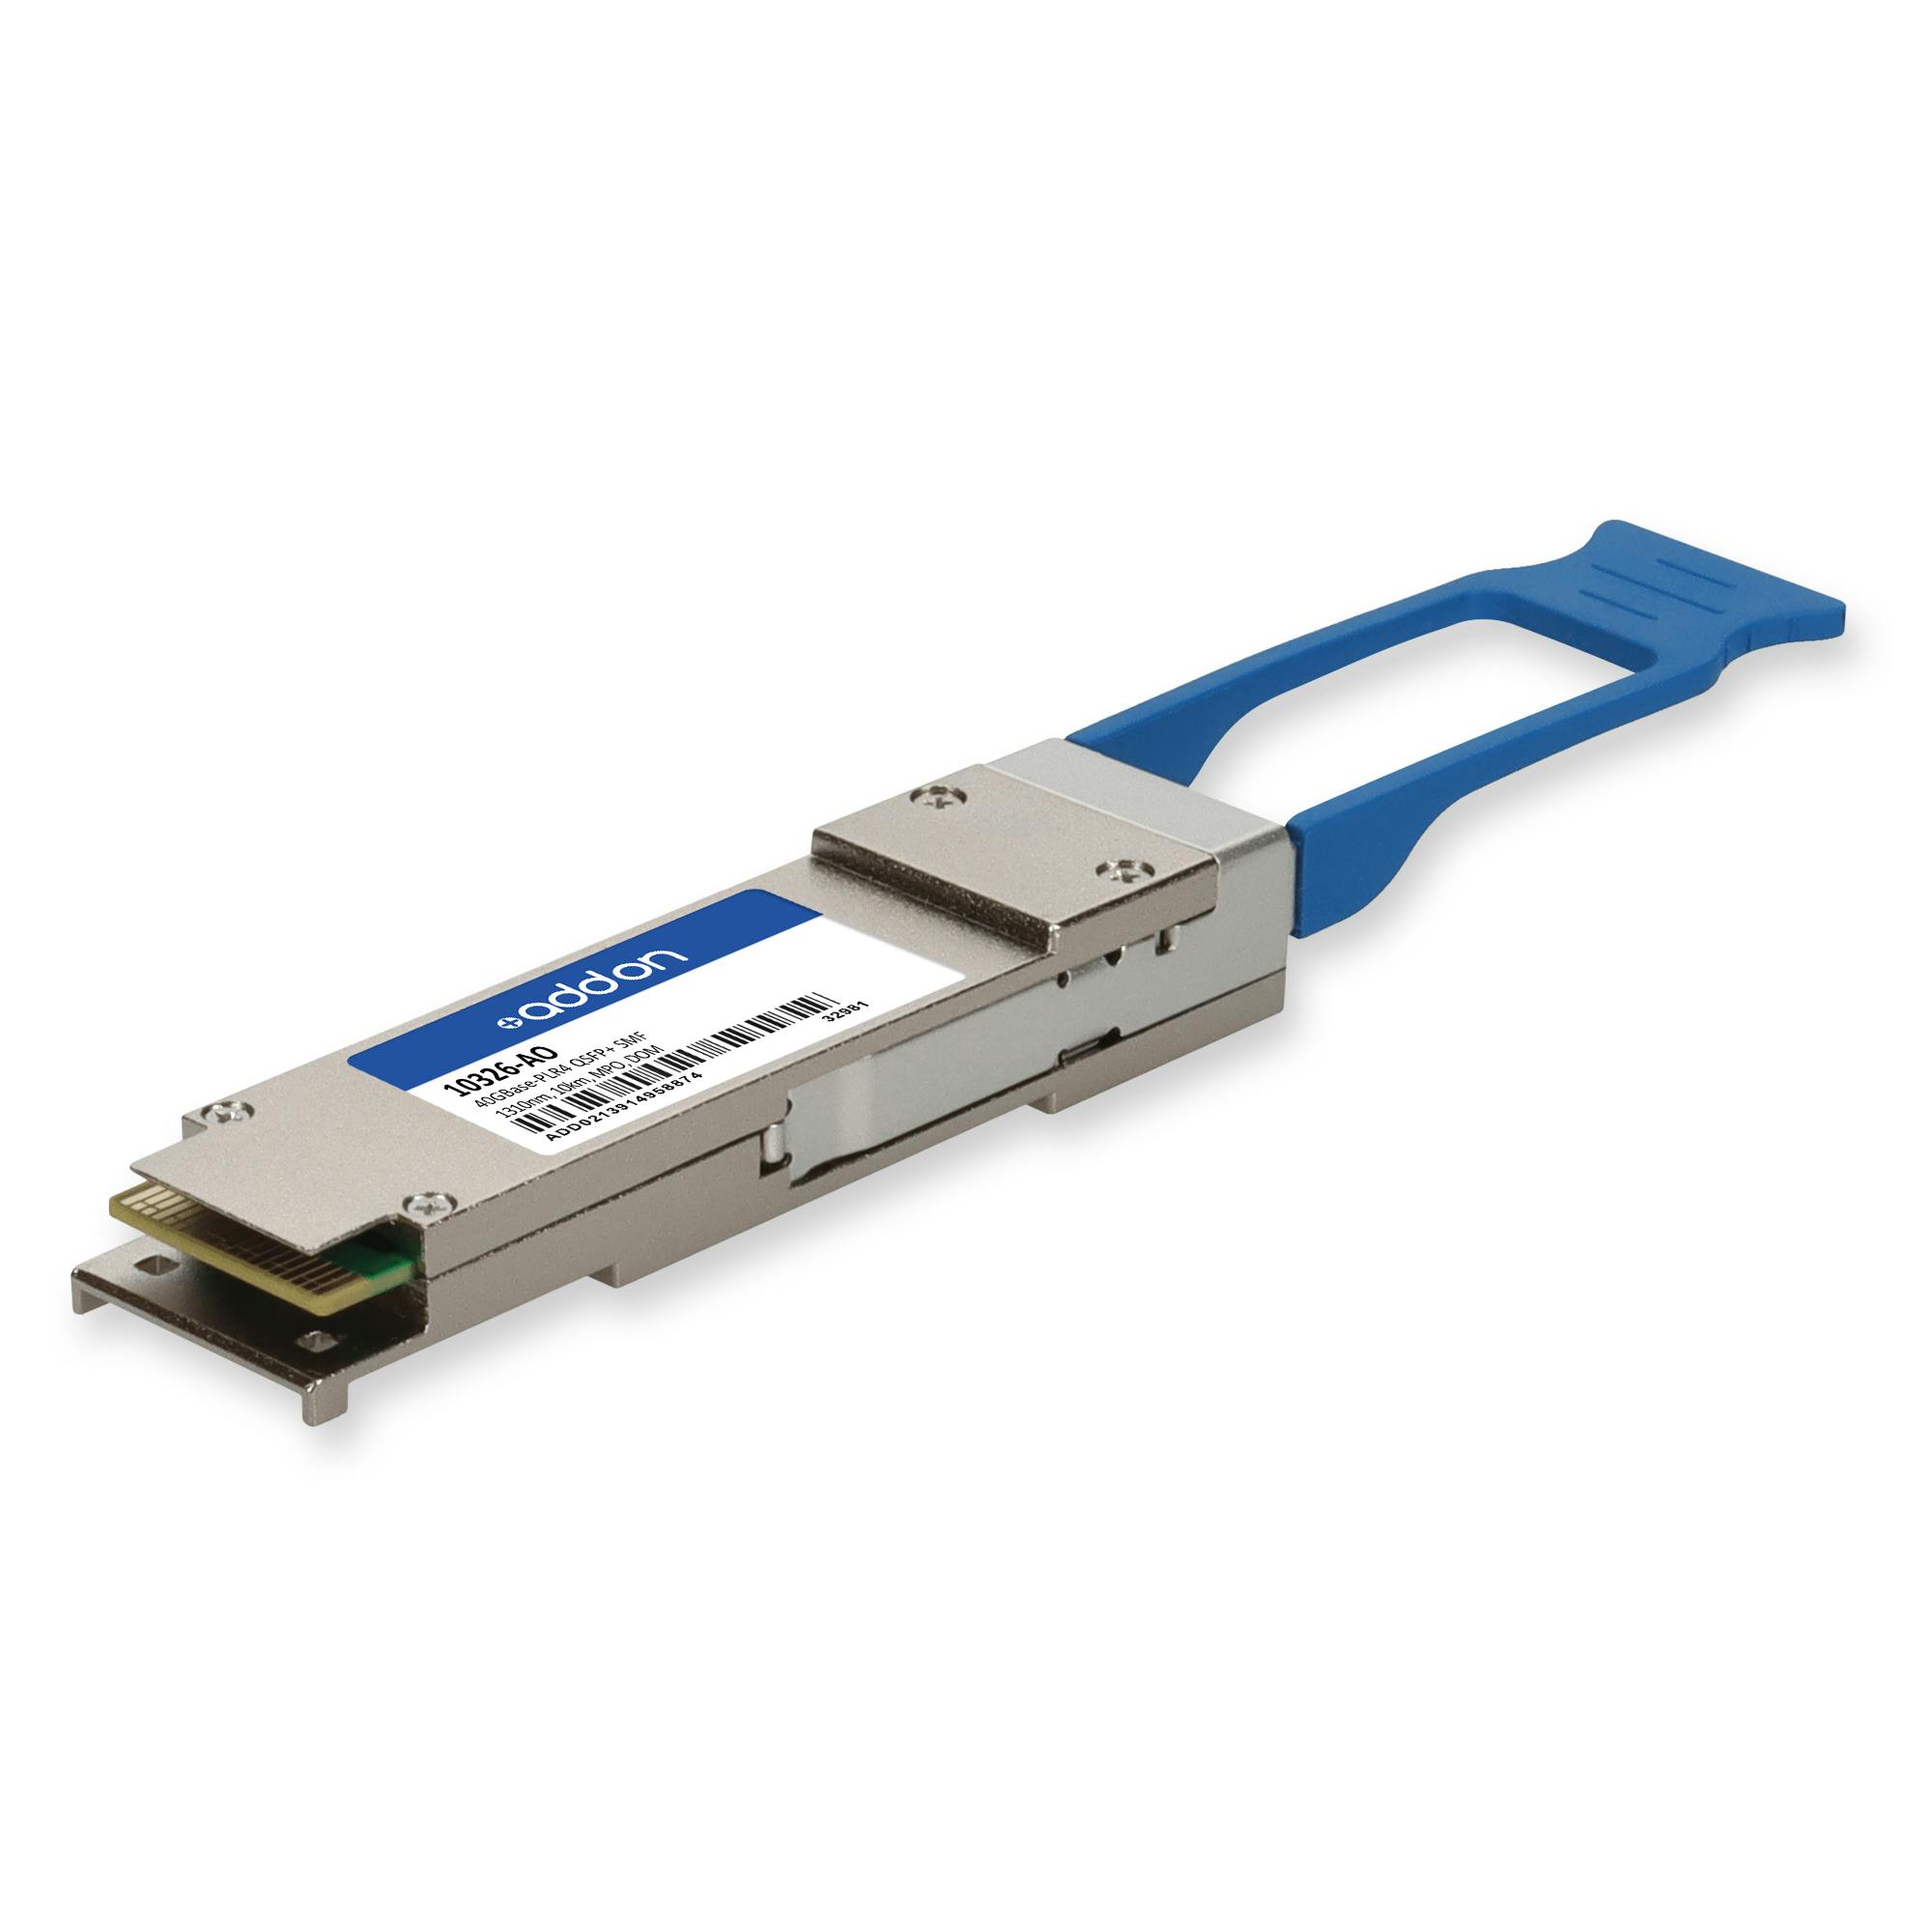 Add-onputer Peripherals L Addon Extreme Networks 10064 Compatible 1000base-zx Sfp Transceiver sm 